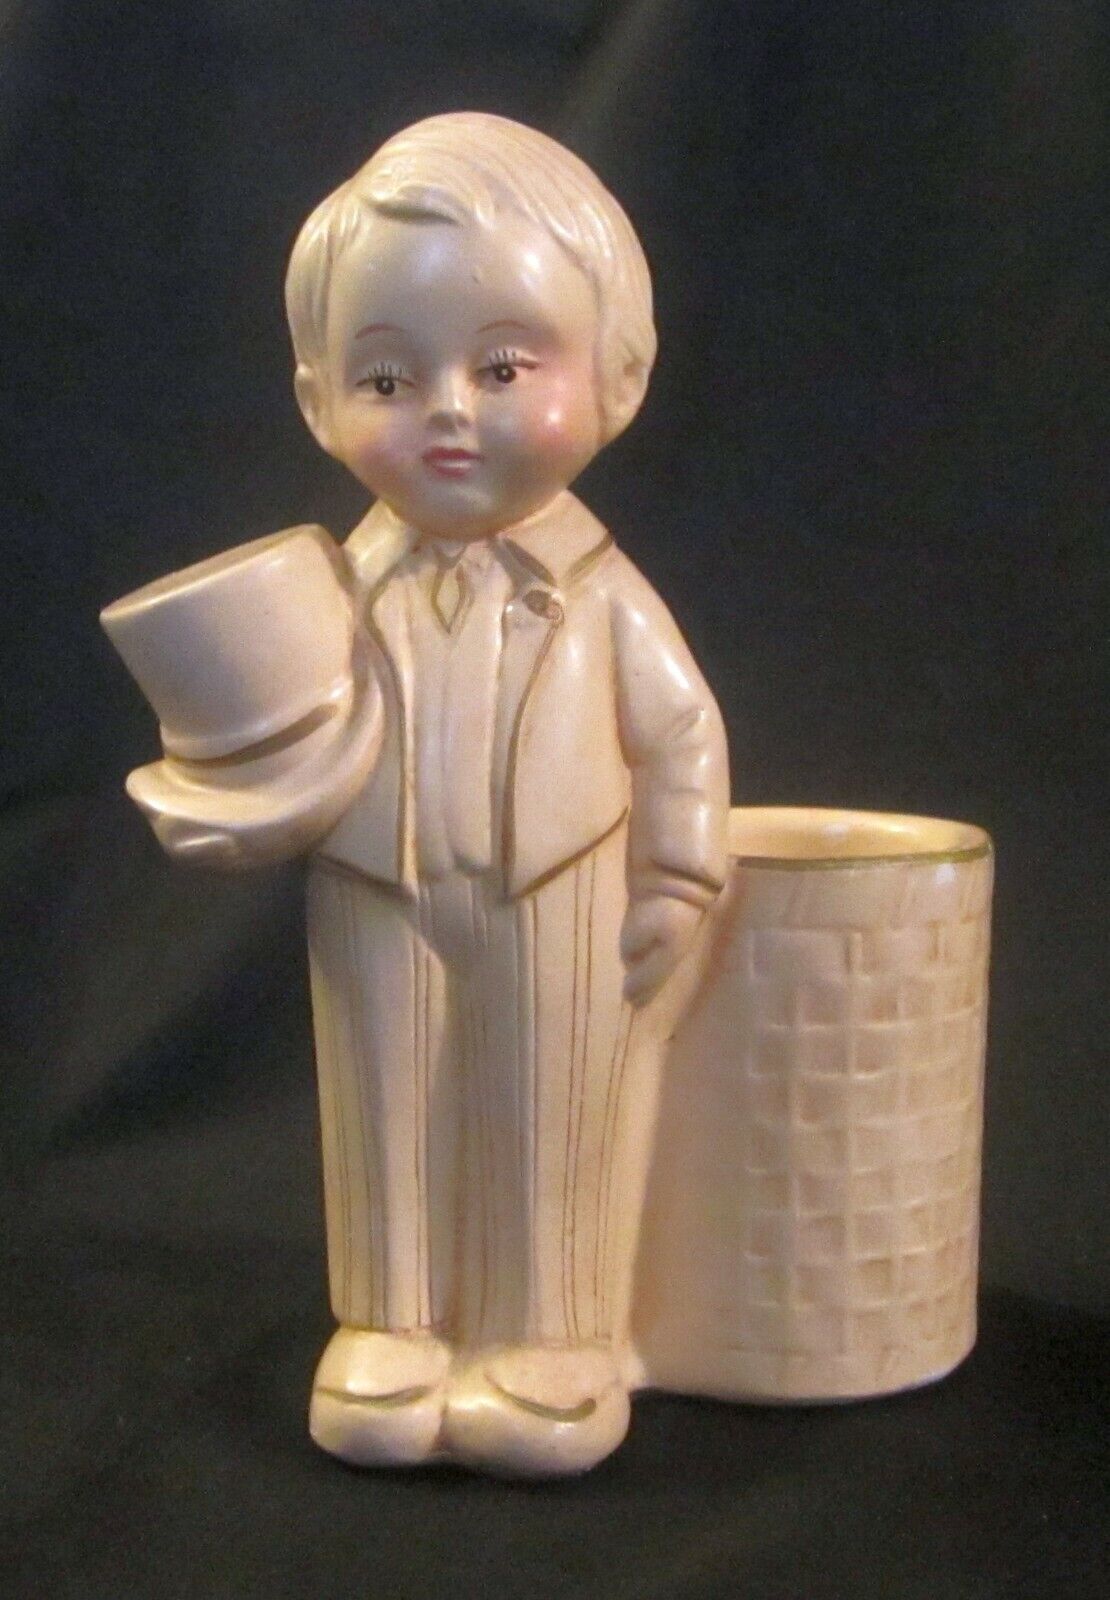 Coventry Ware Boy in Formal Attire Top Hat Vintage Plaster Chalkware